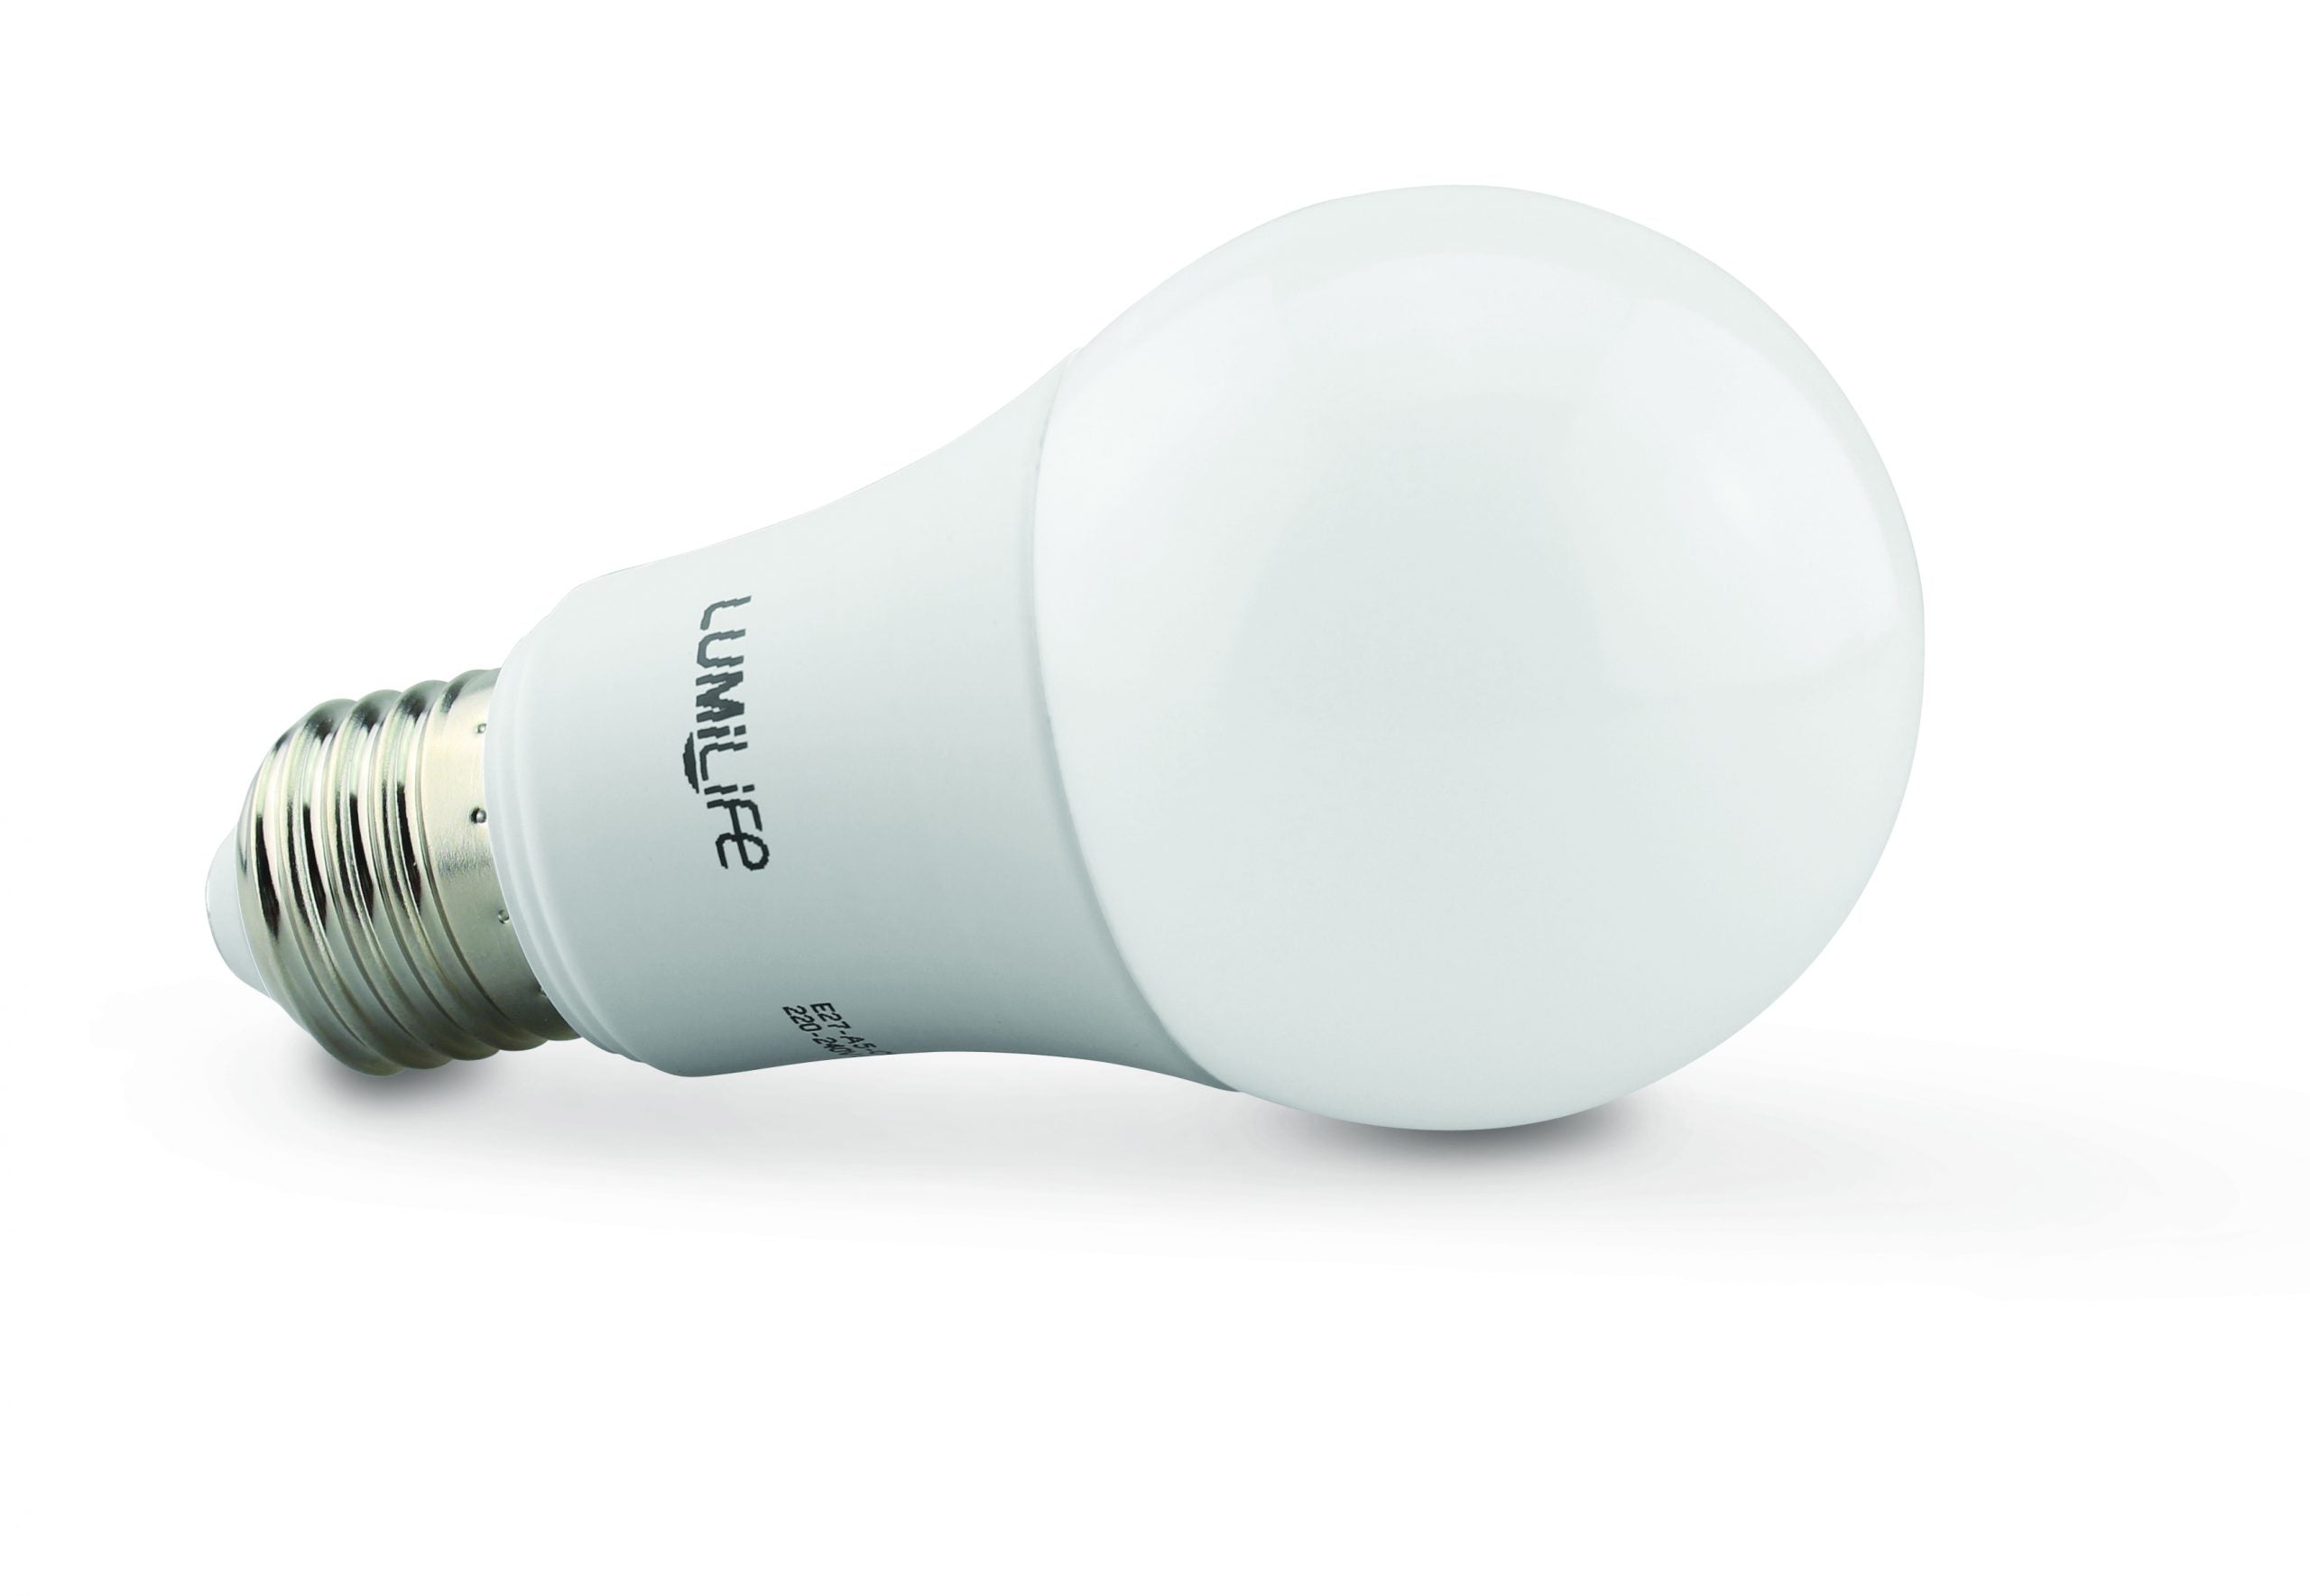 What Is the Difference Between E27 and E14 Light Bulbs? - Knowledge